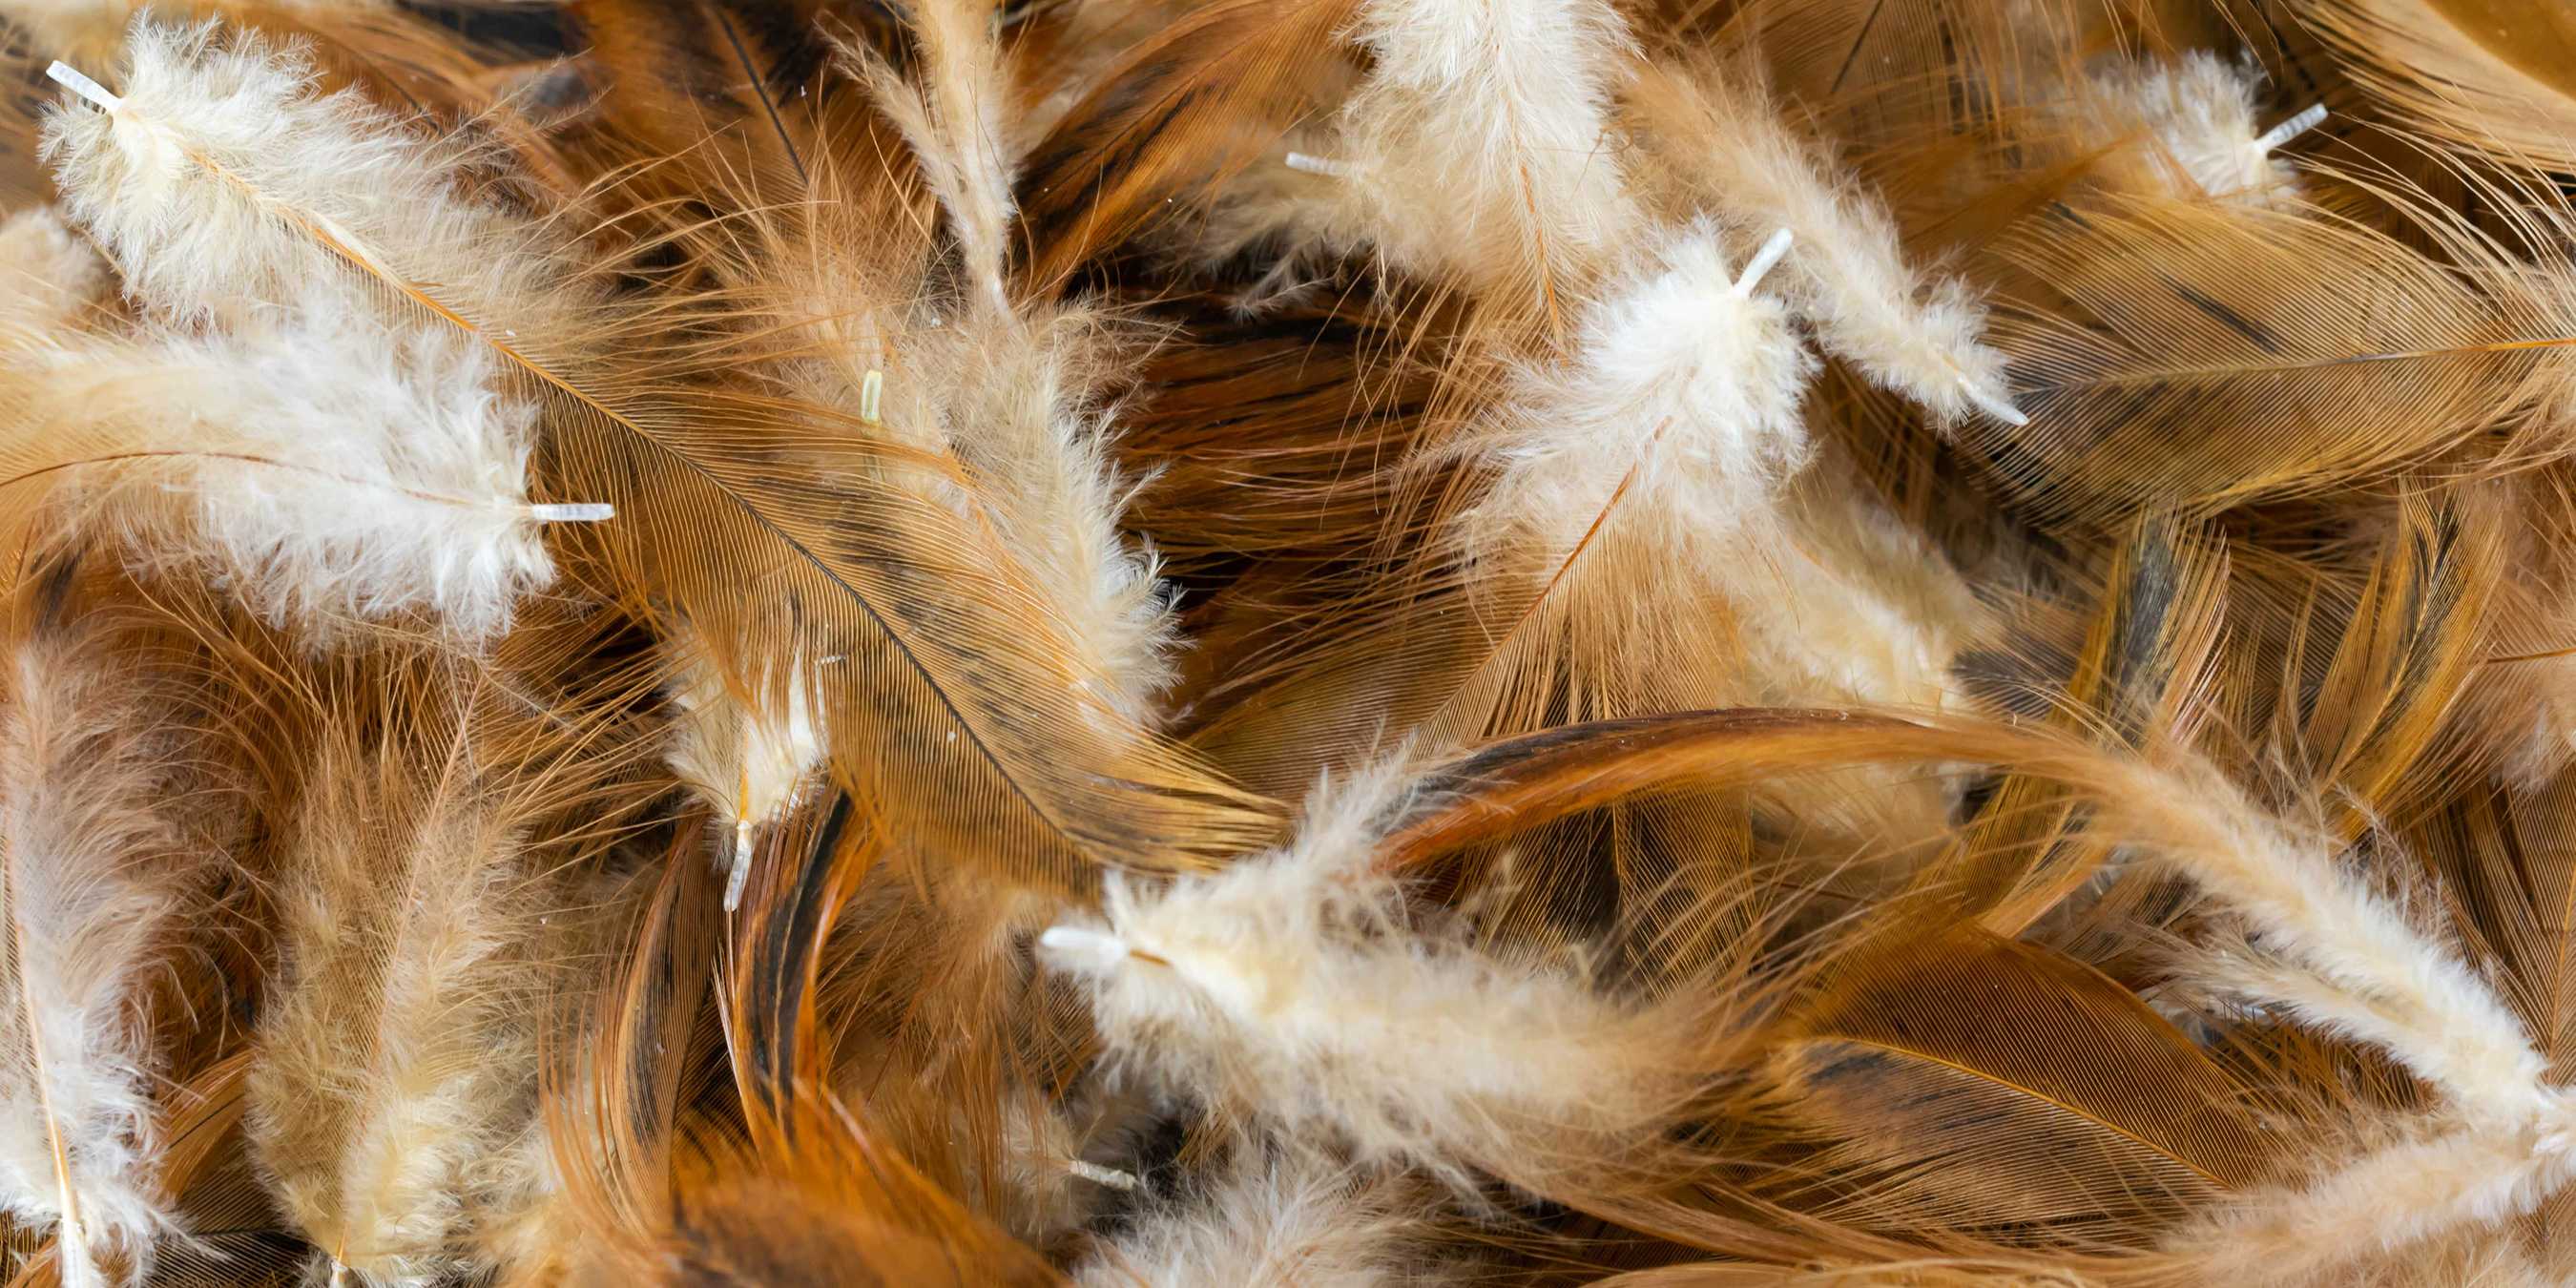  A pile of chicken feathers